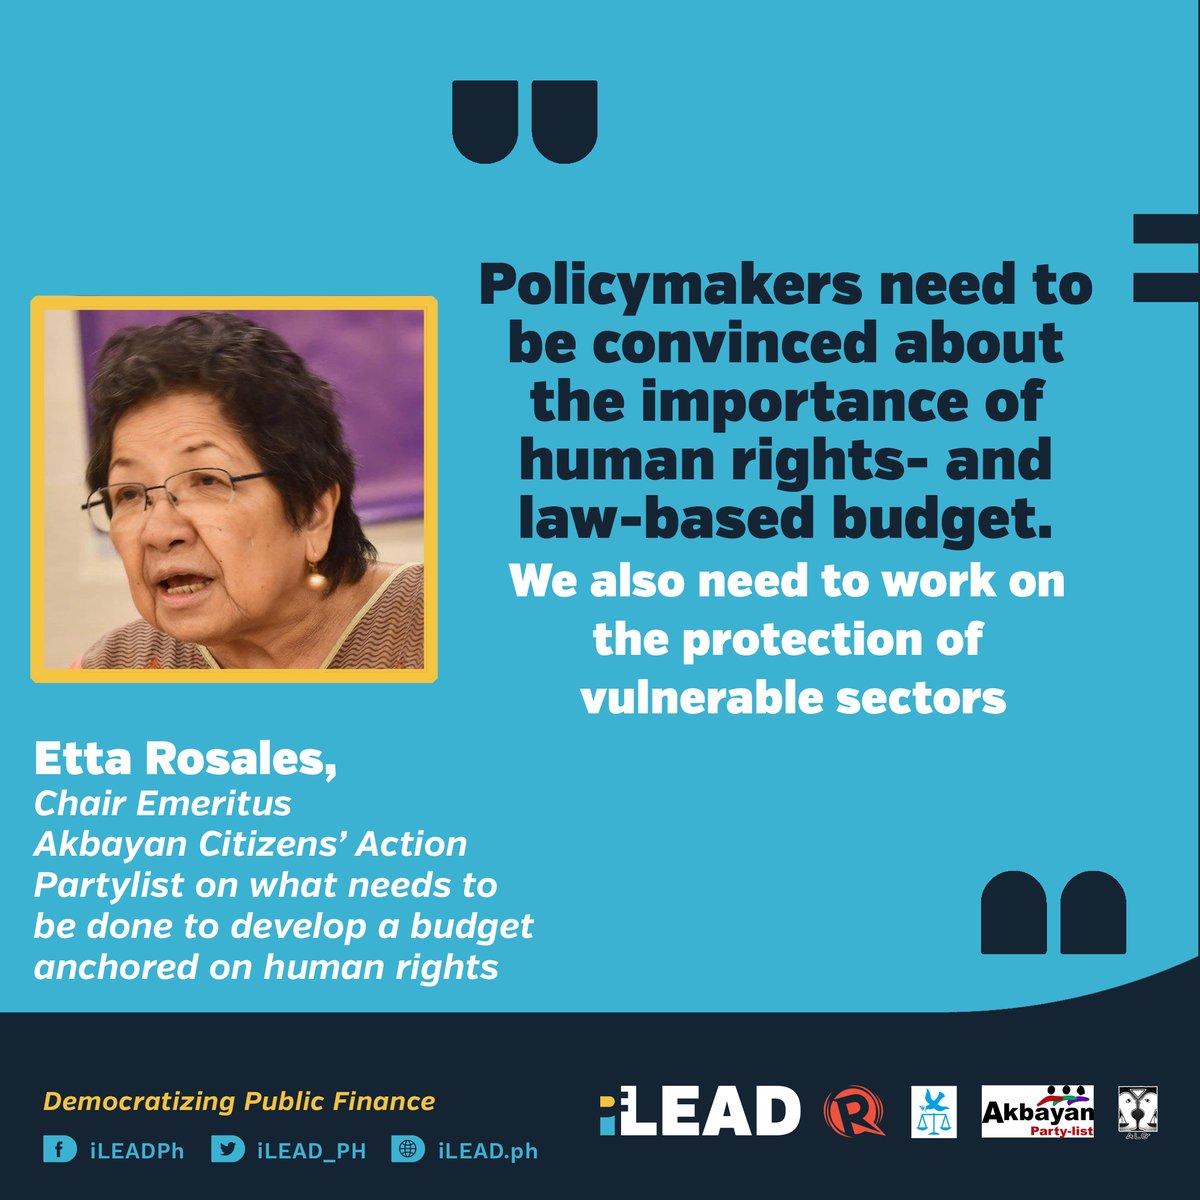 Etta Rosales, Chair Emeritus,  @AkbayanParty says that the government's definition of "national security" needs to be revisited to include considerations of economic, psychological, and social security. These should then be factored in policies.